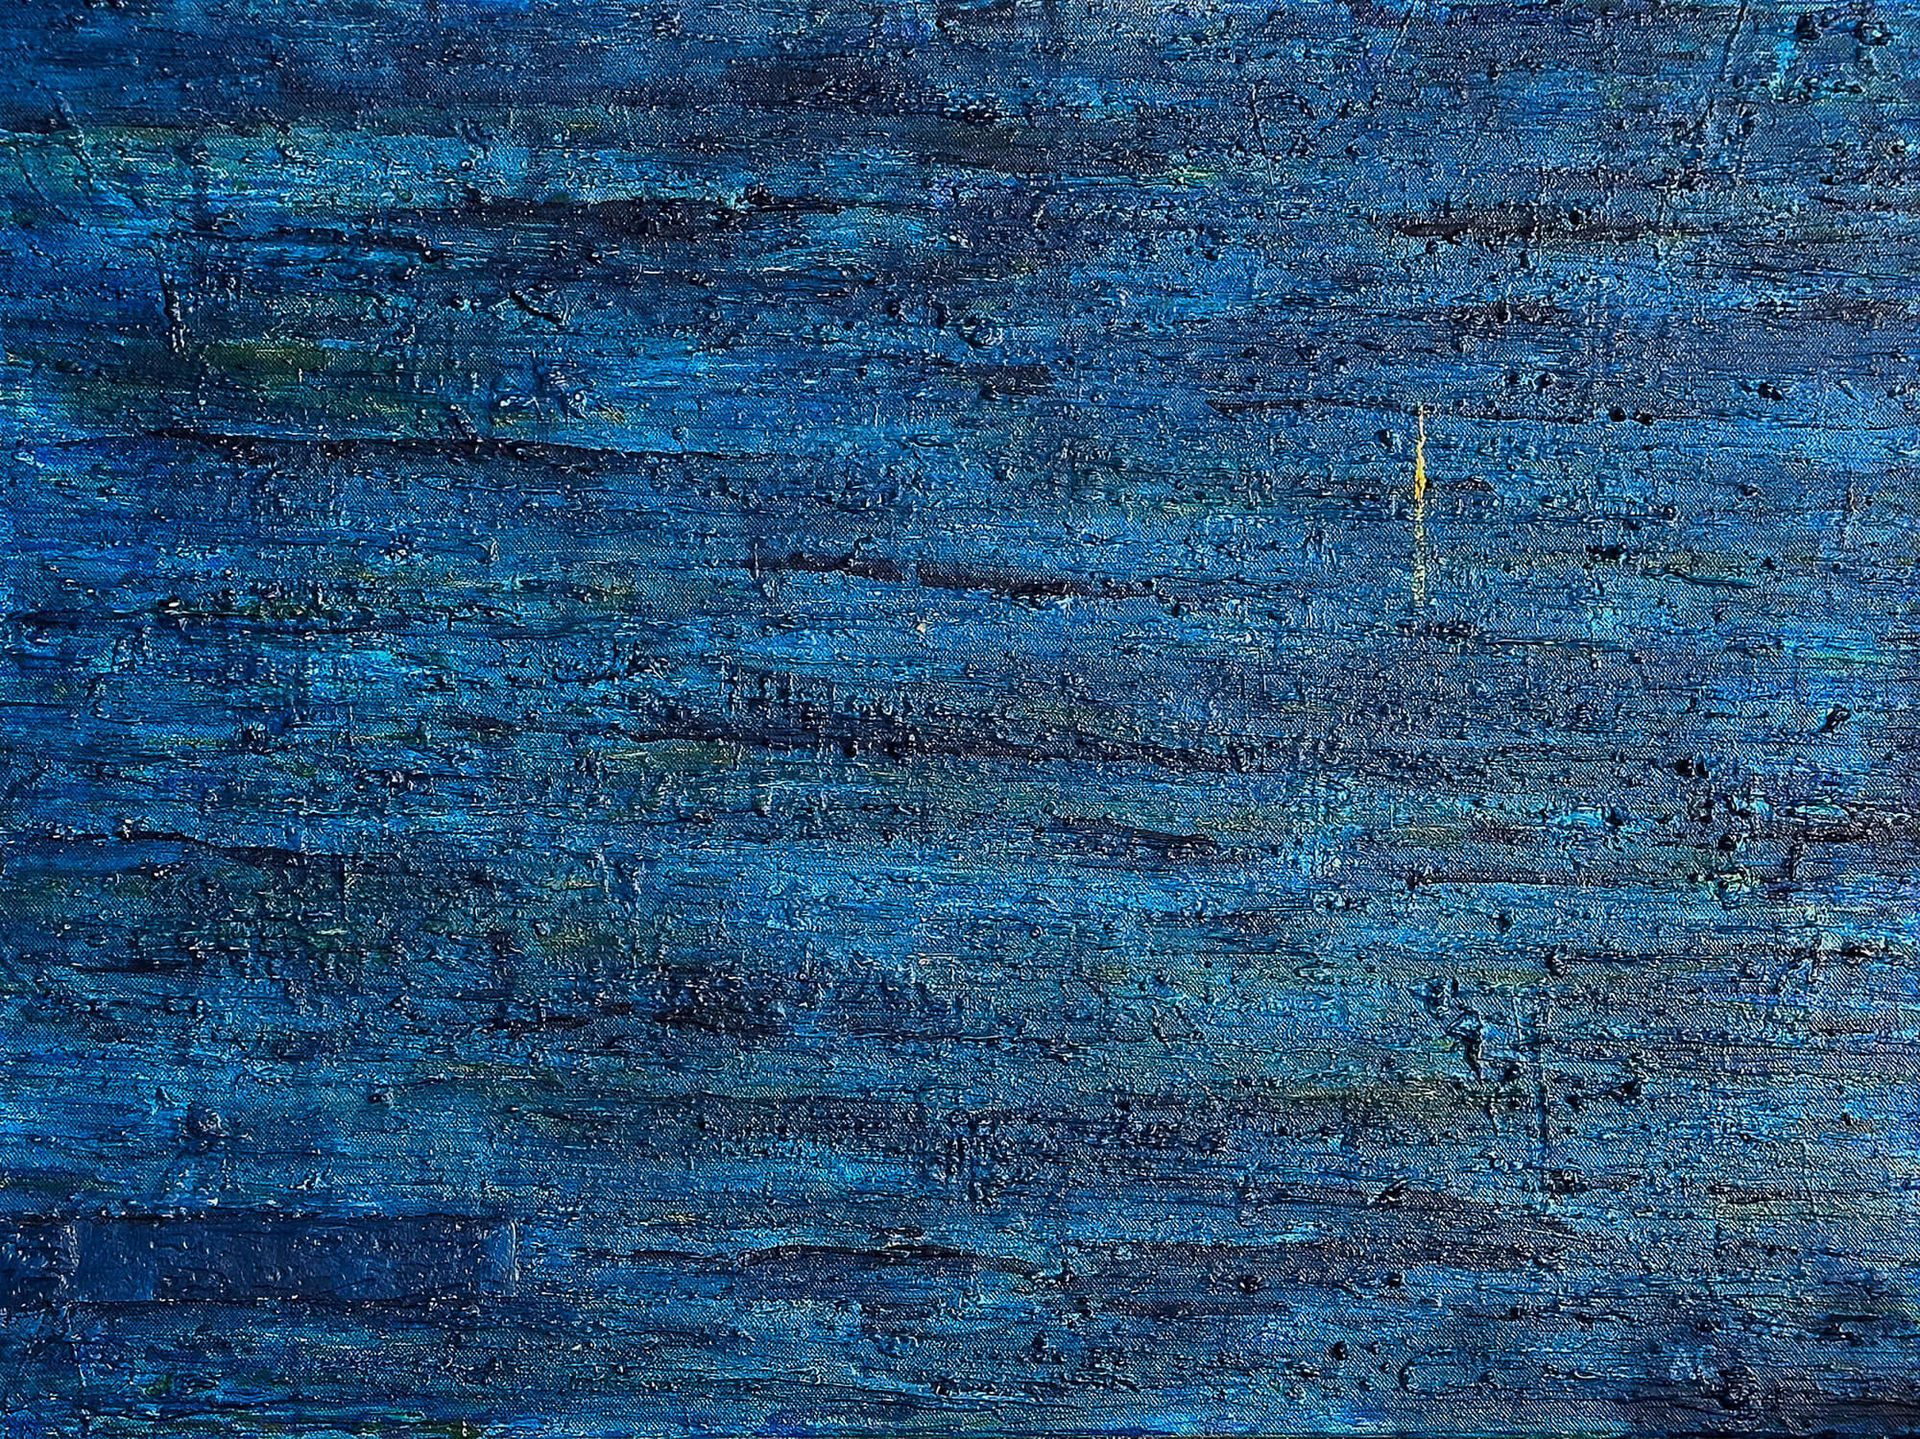 Rich, deep abstract painting in Prussian blue with a single vertical yellow stroke in the upper right quarter